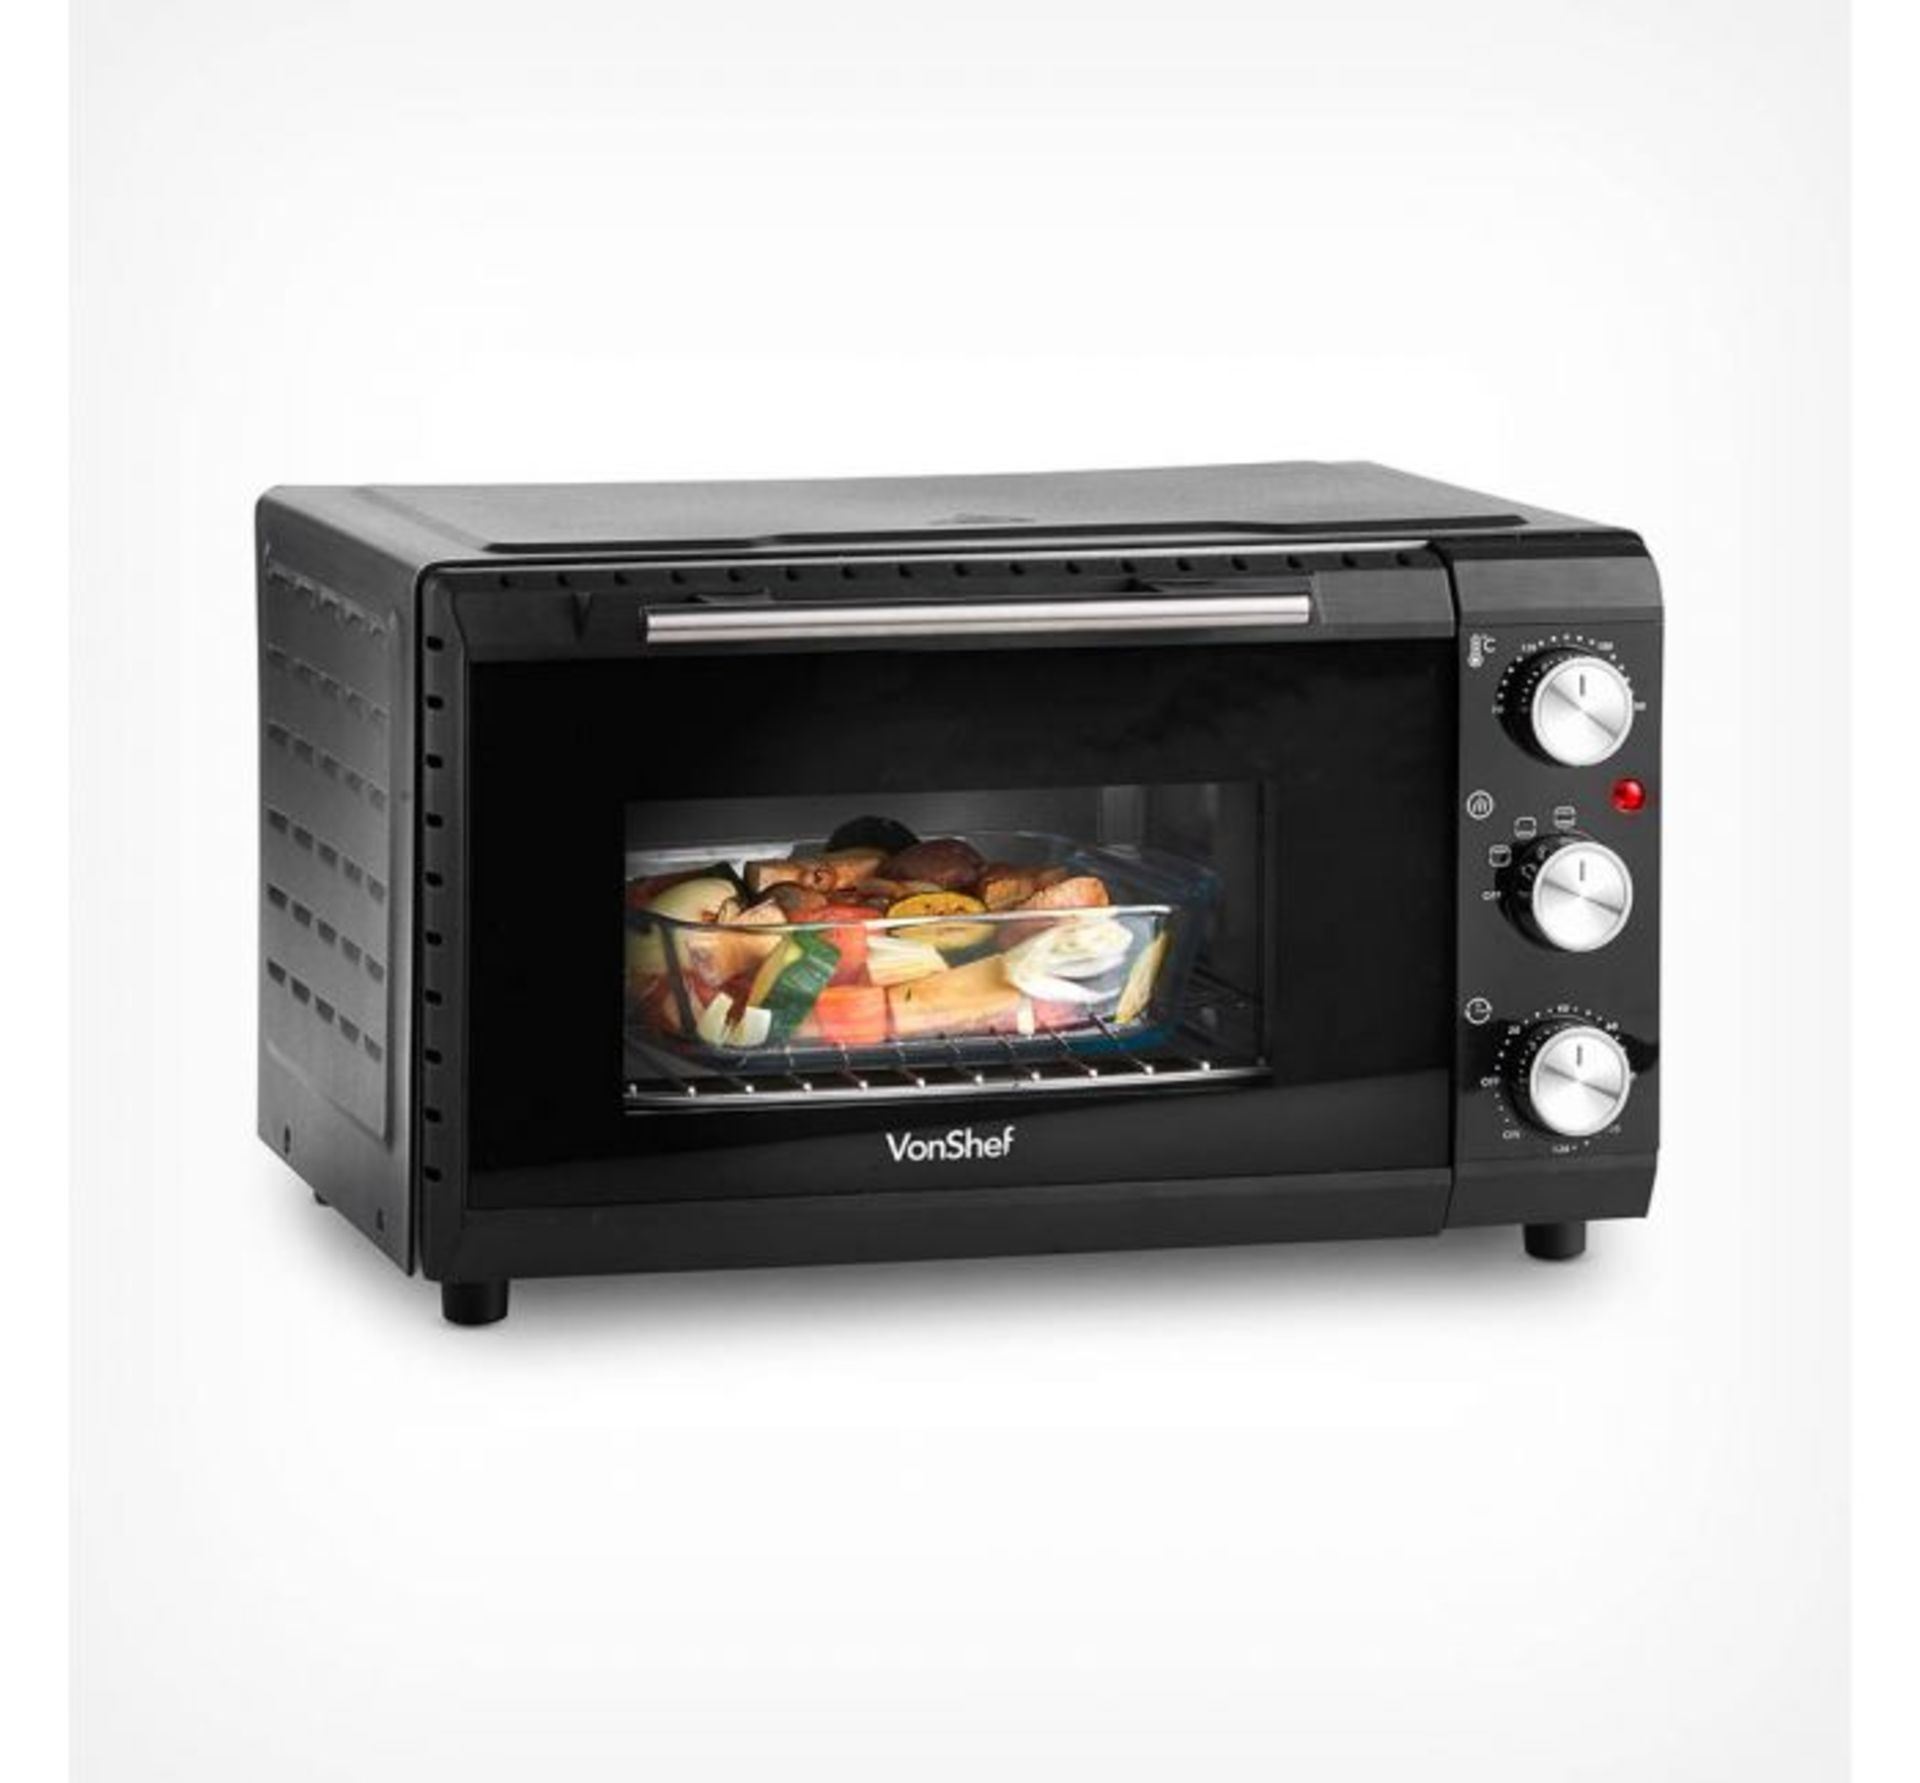 (OM77) 35L Mini Oven 600W power with multiple cooking functions Temperature ranges between 70... - Image 2 of 2